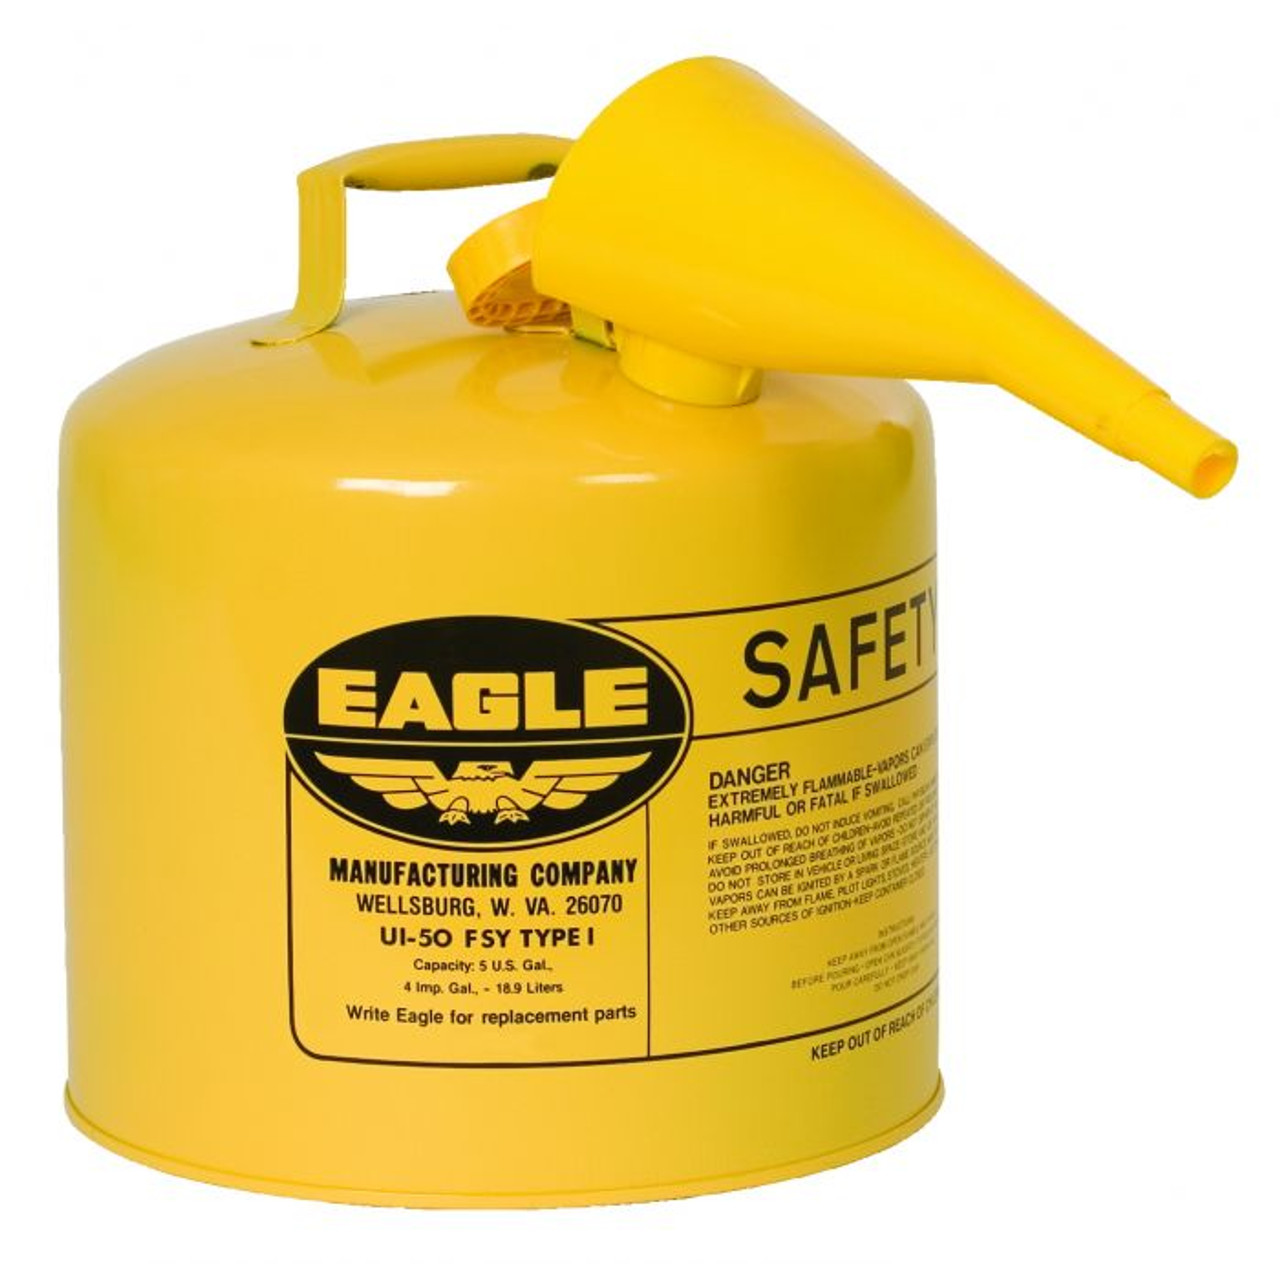 Eagle UI50FSY Type I Steel Safety Can For Diesel, 5 Gallon, With Funnel, Flame Arrester, Yellow